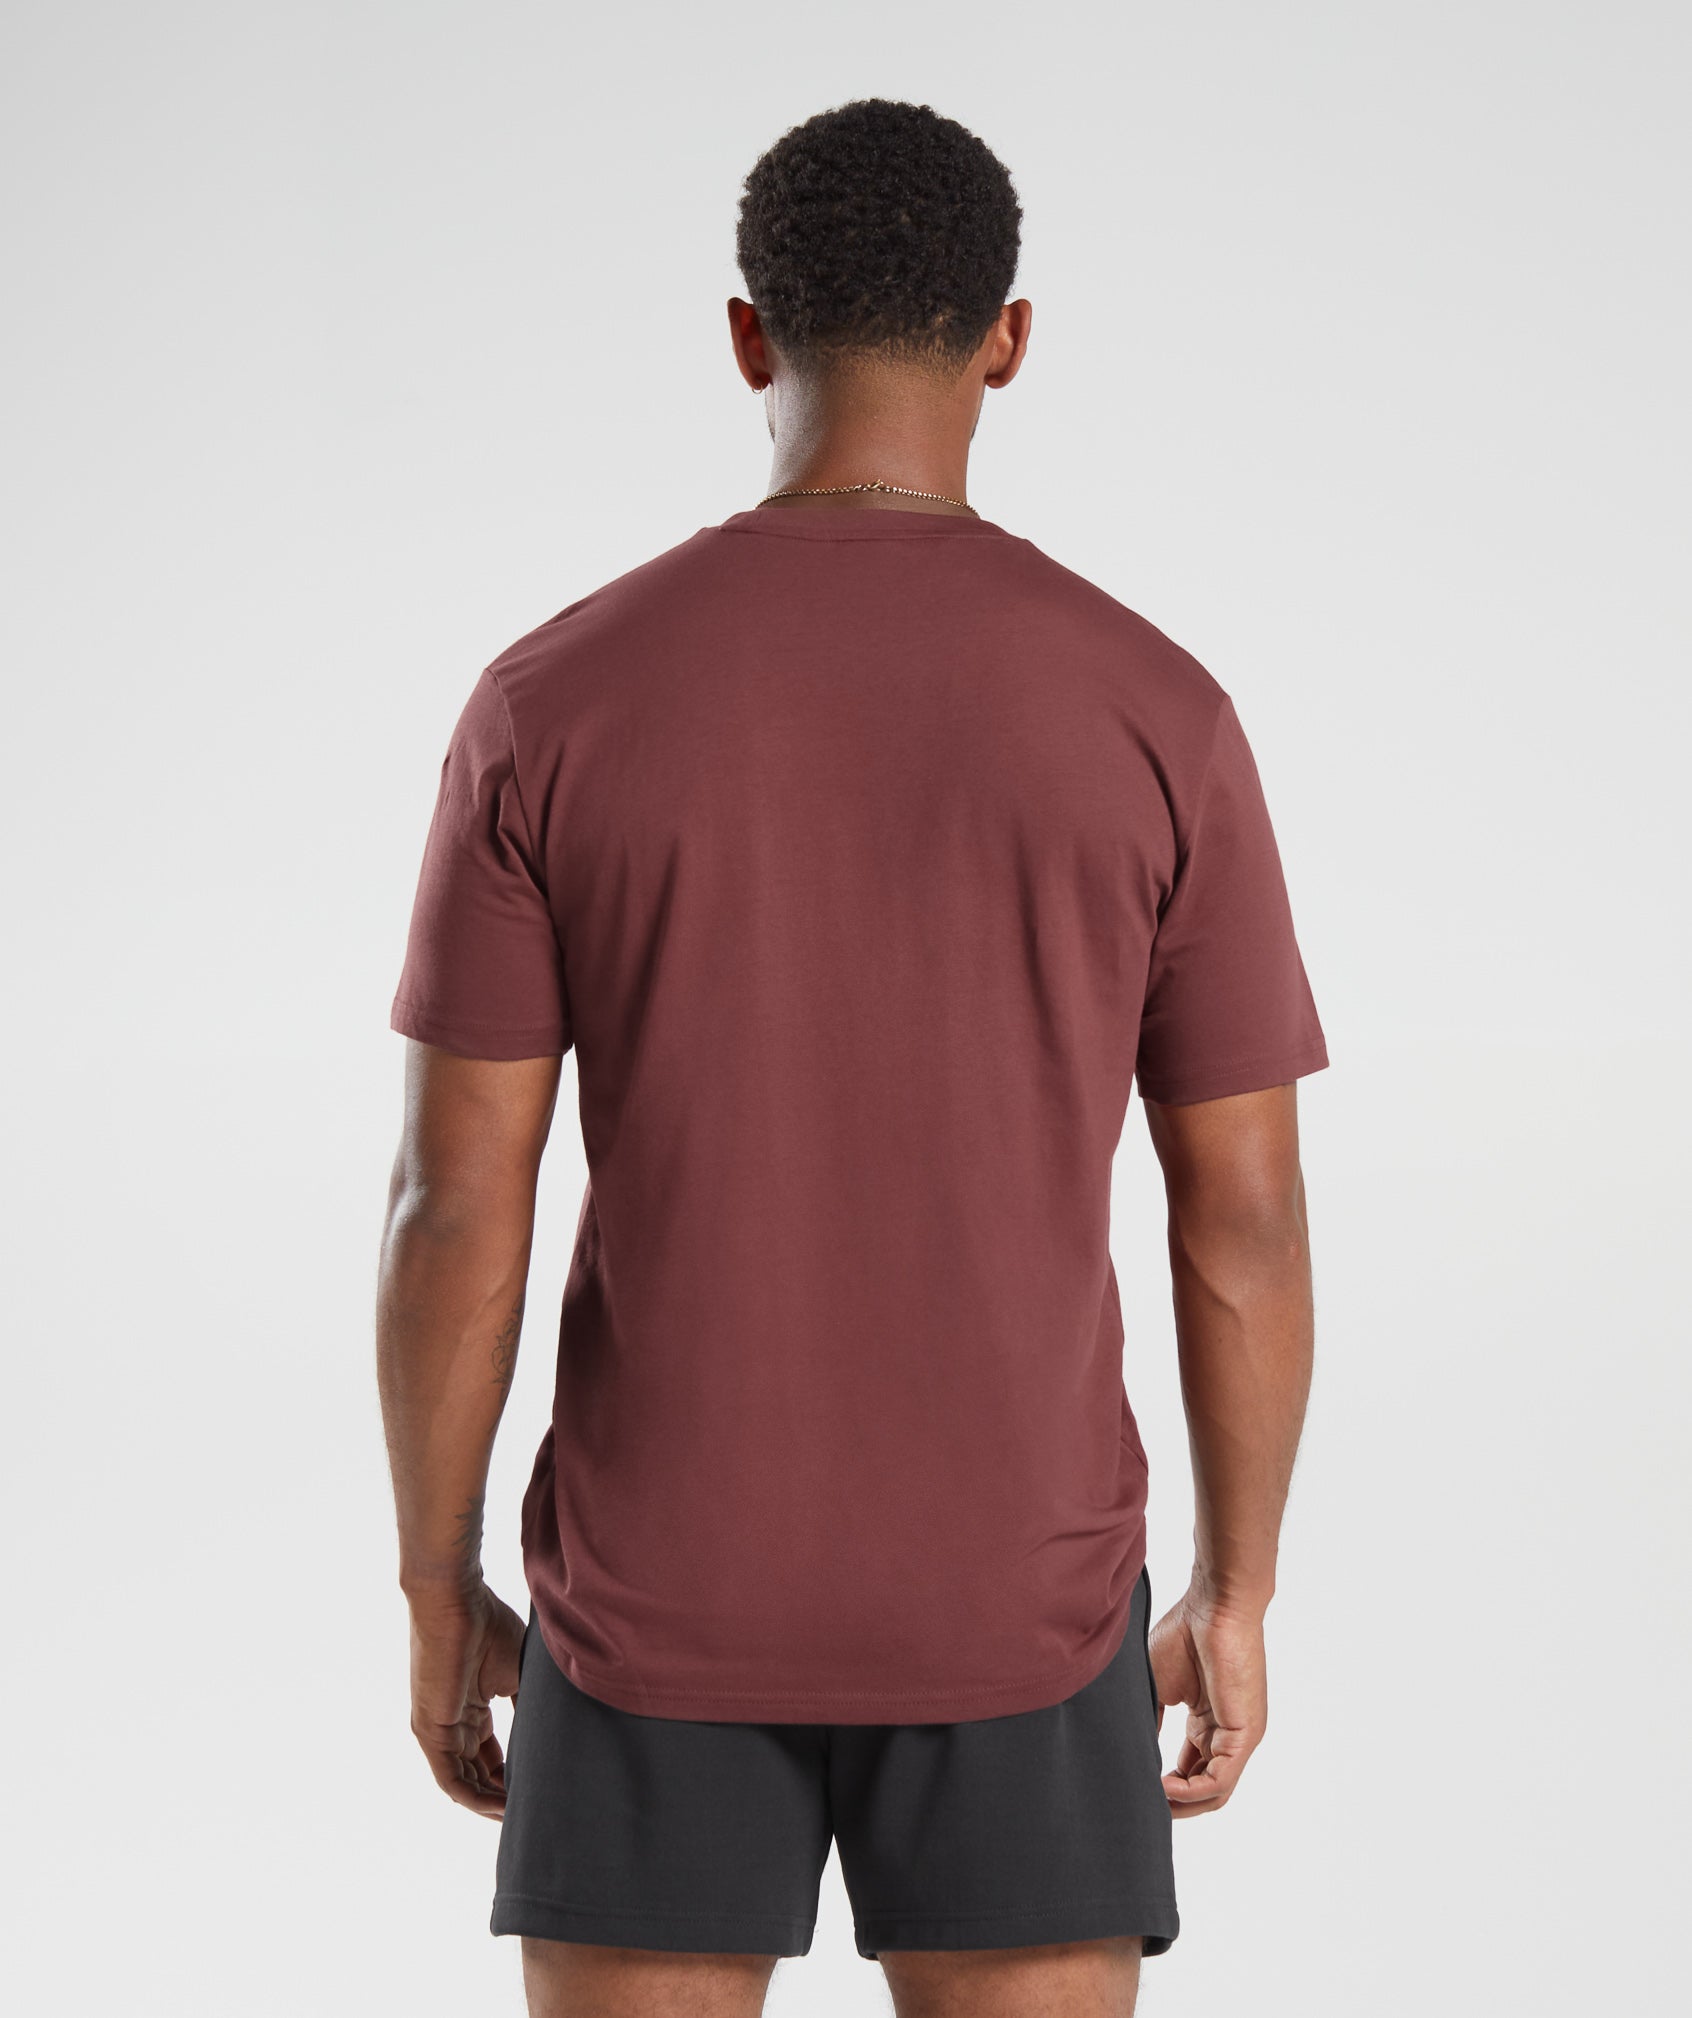 Crest T-Shirt in Washed Burgundy - view 2